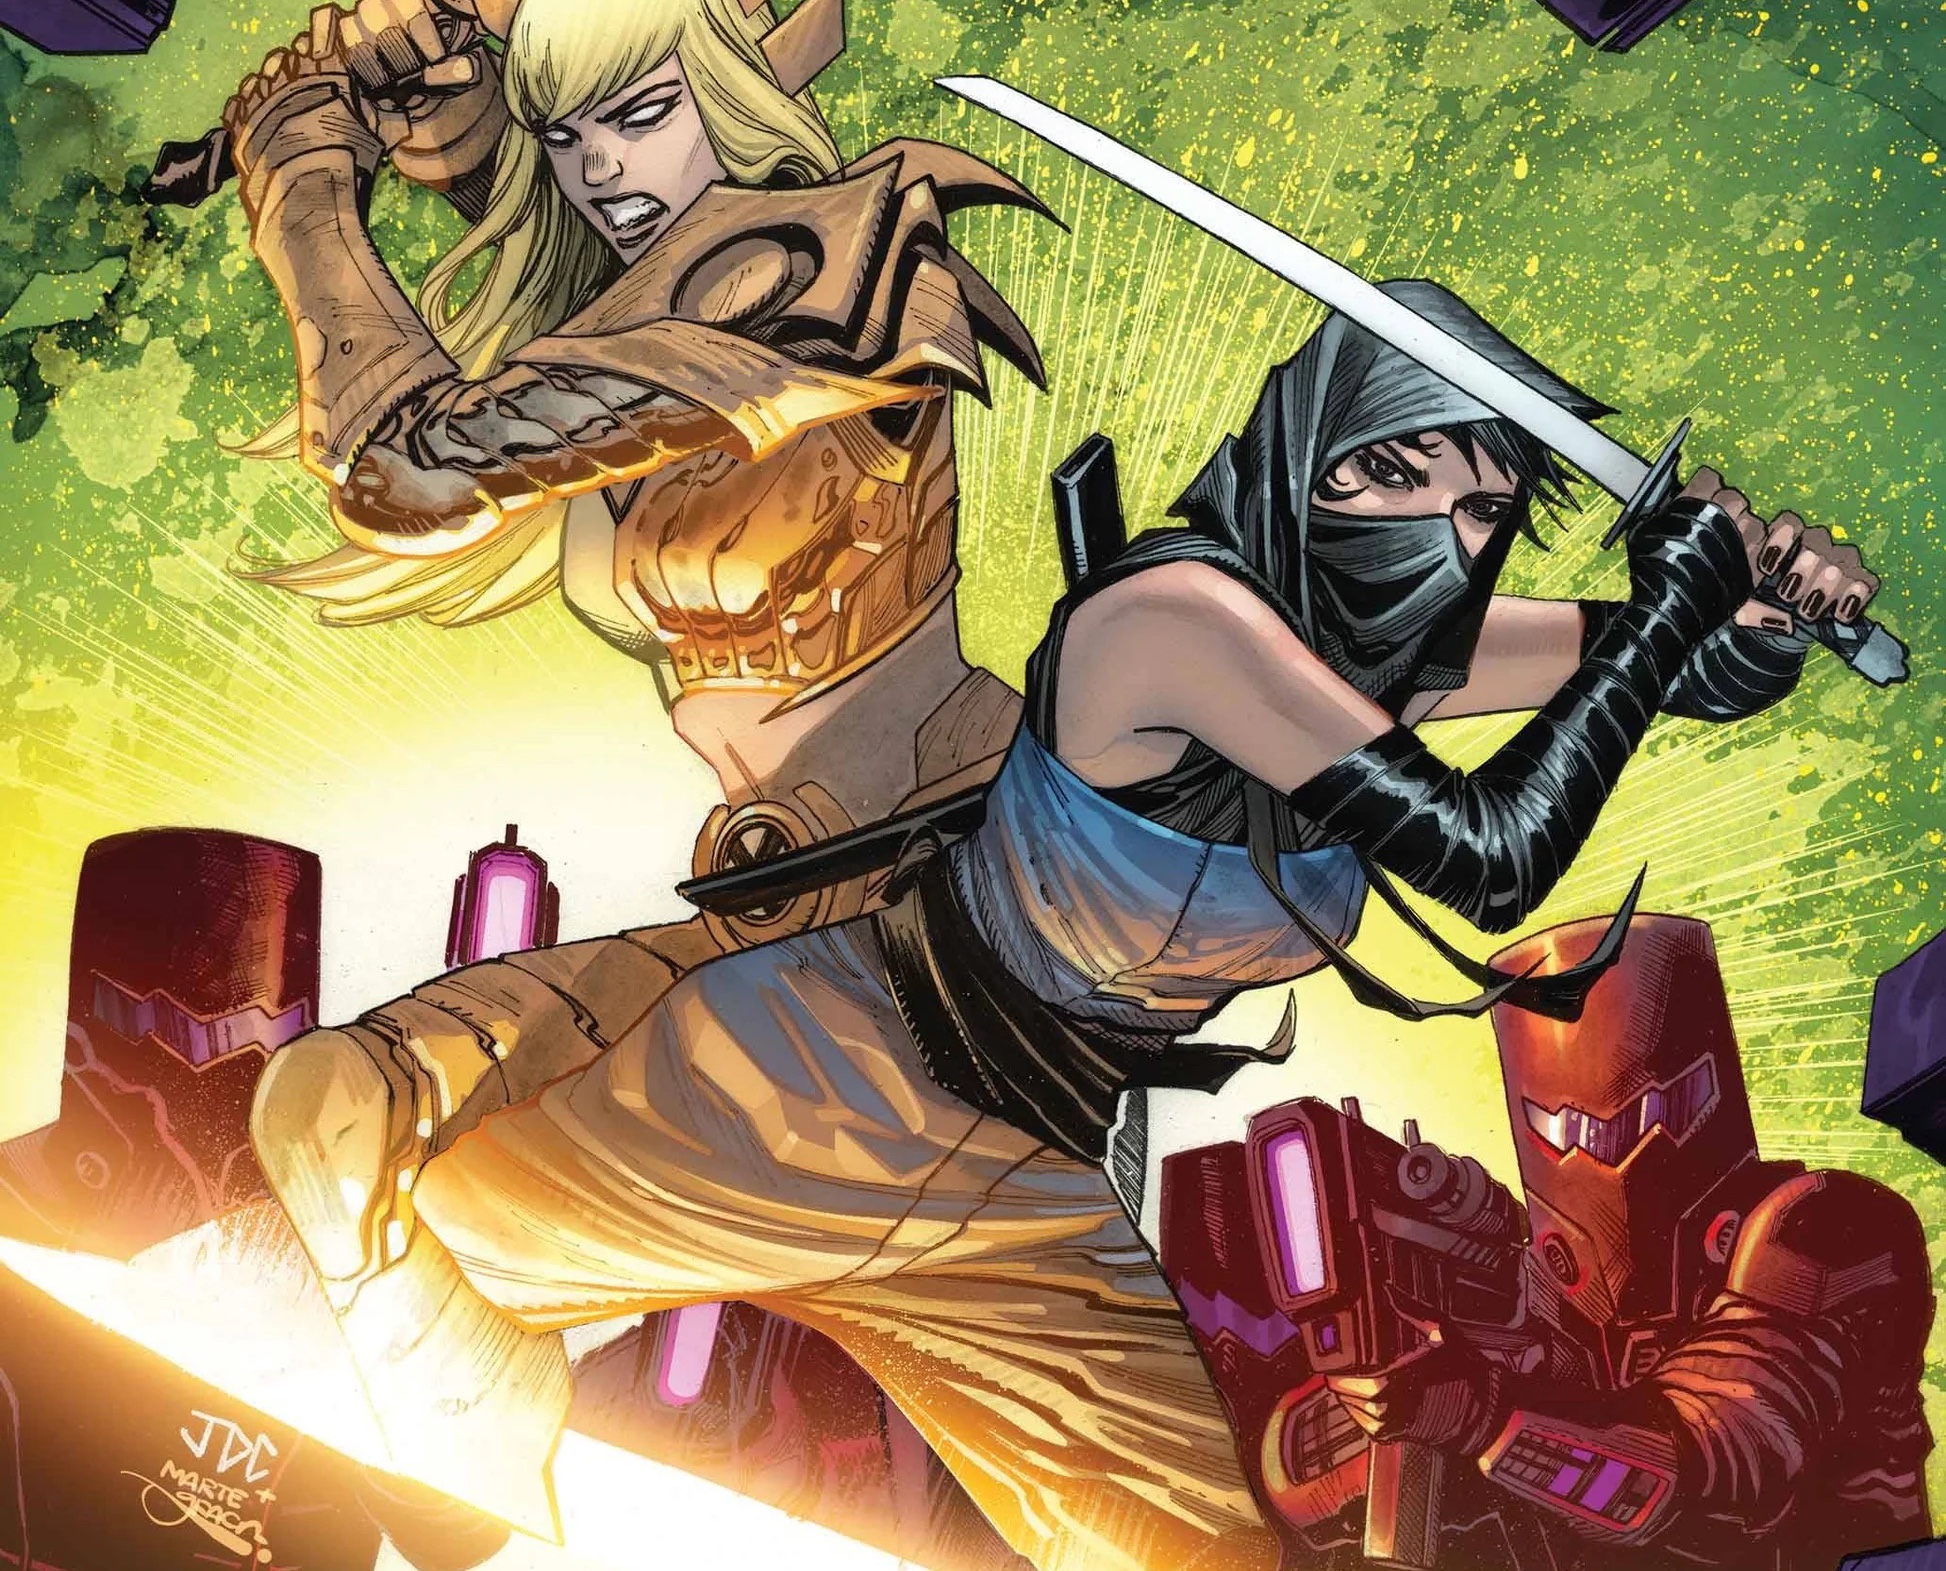 Magik and Shadowkat on the cropped cover of X-Men #32